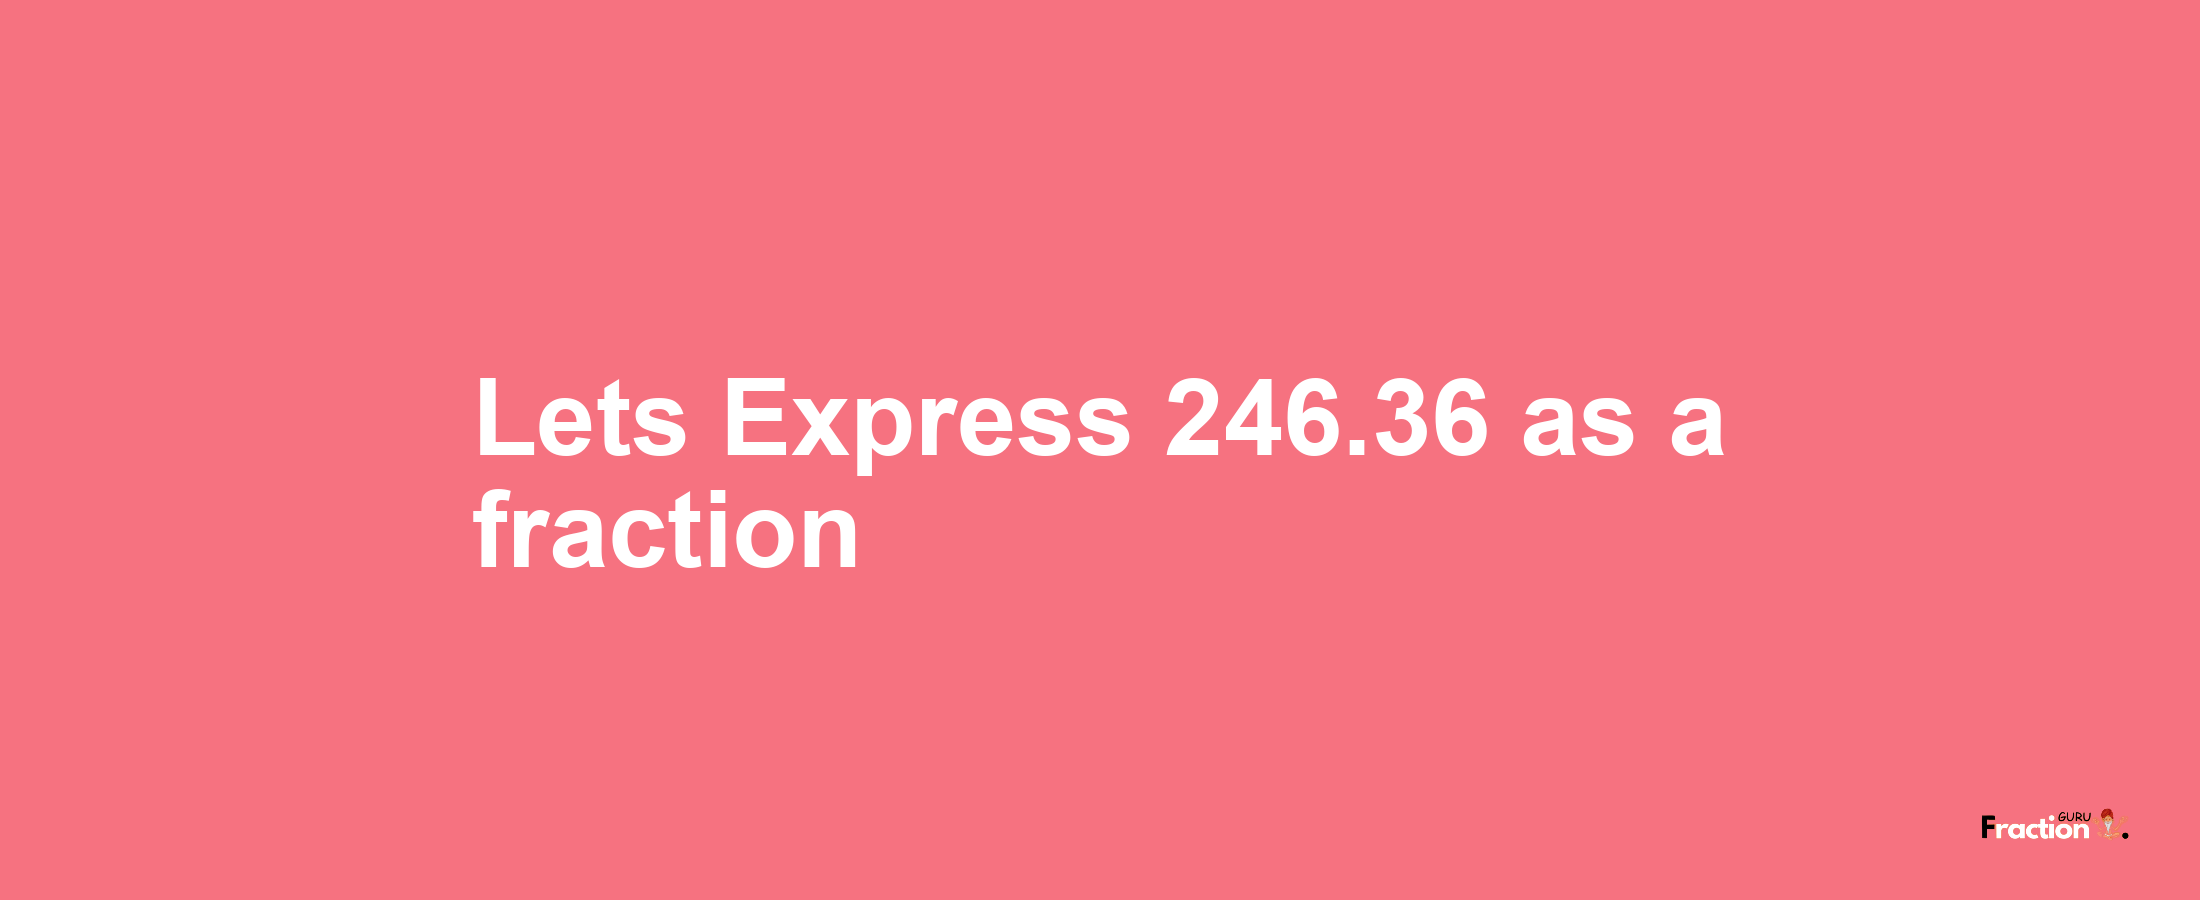 Lets Express 246.36 as afraction